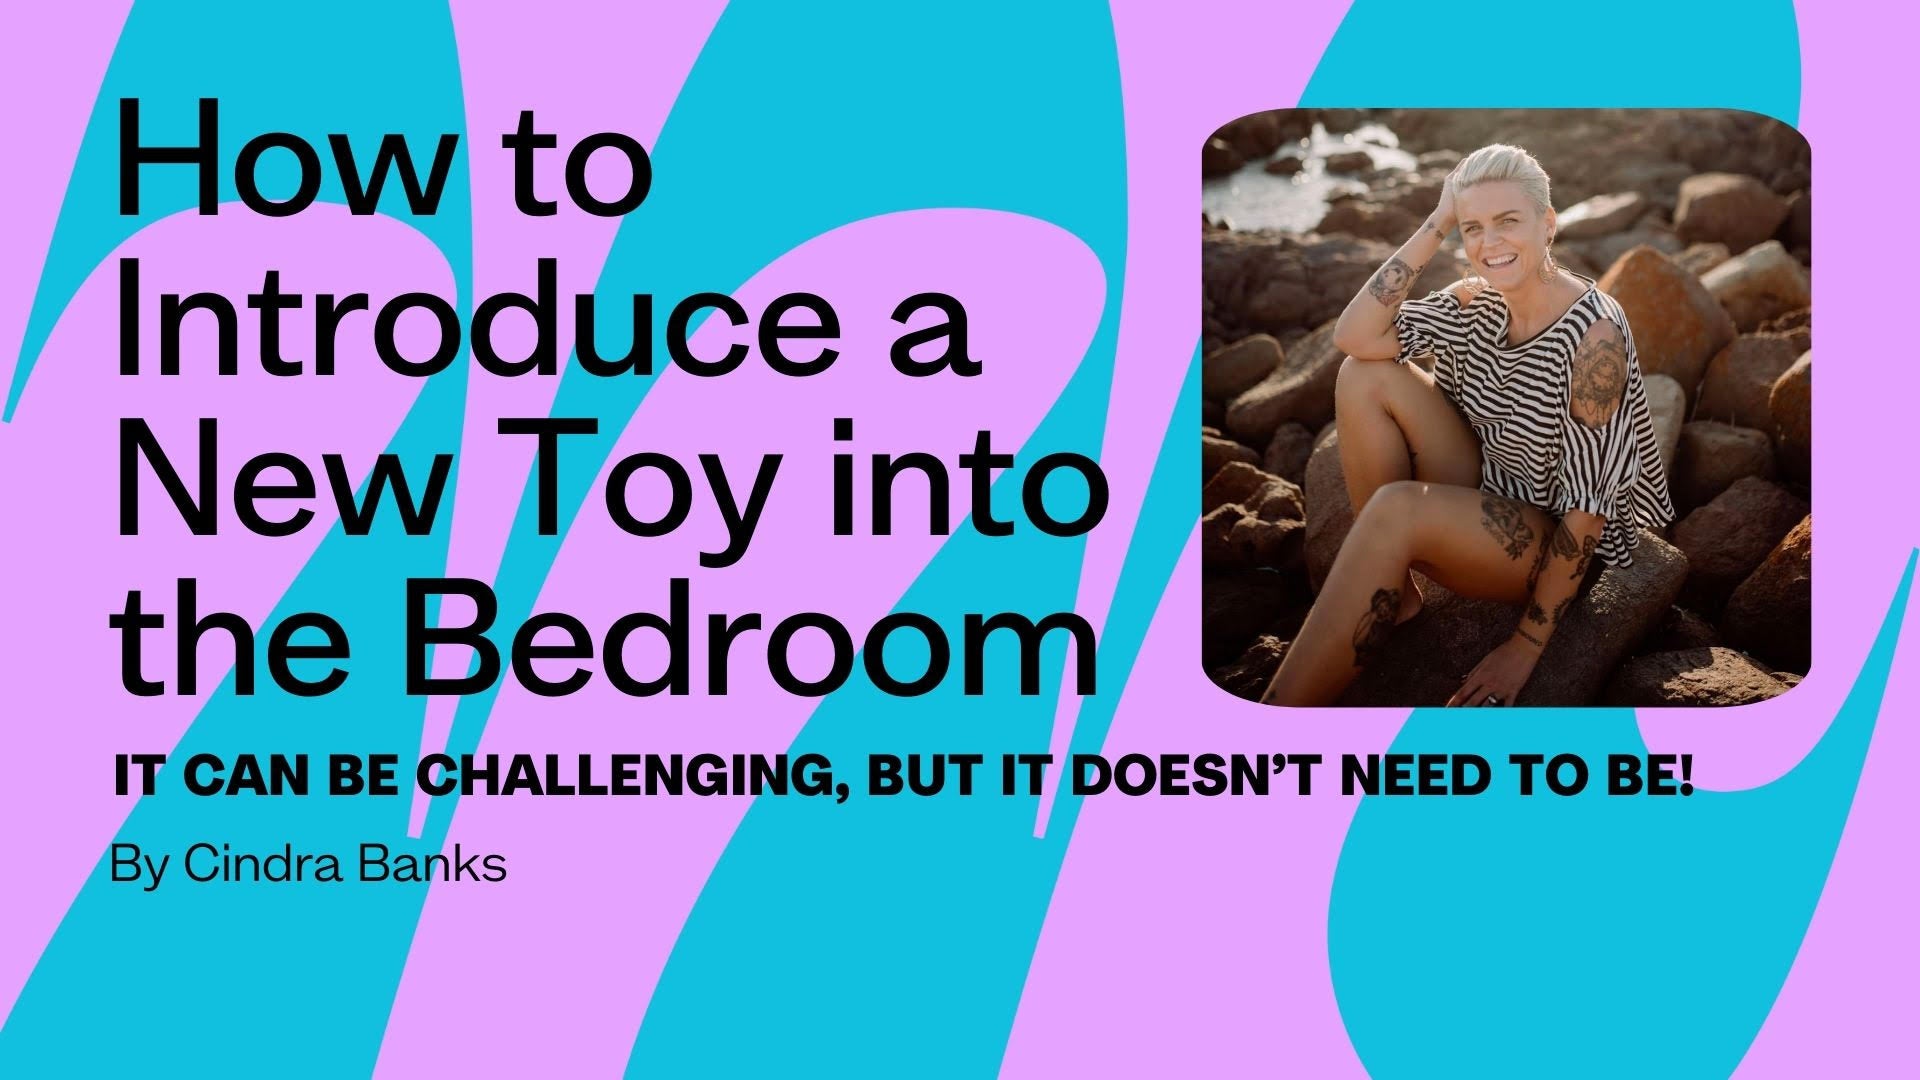 How to Introduce a New Toy into the Bedroom